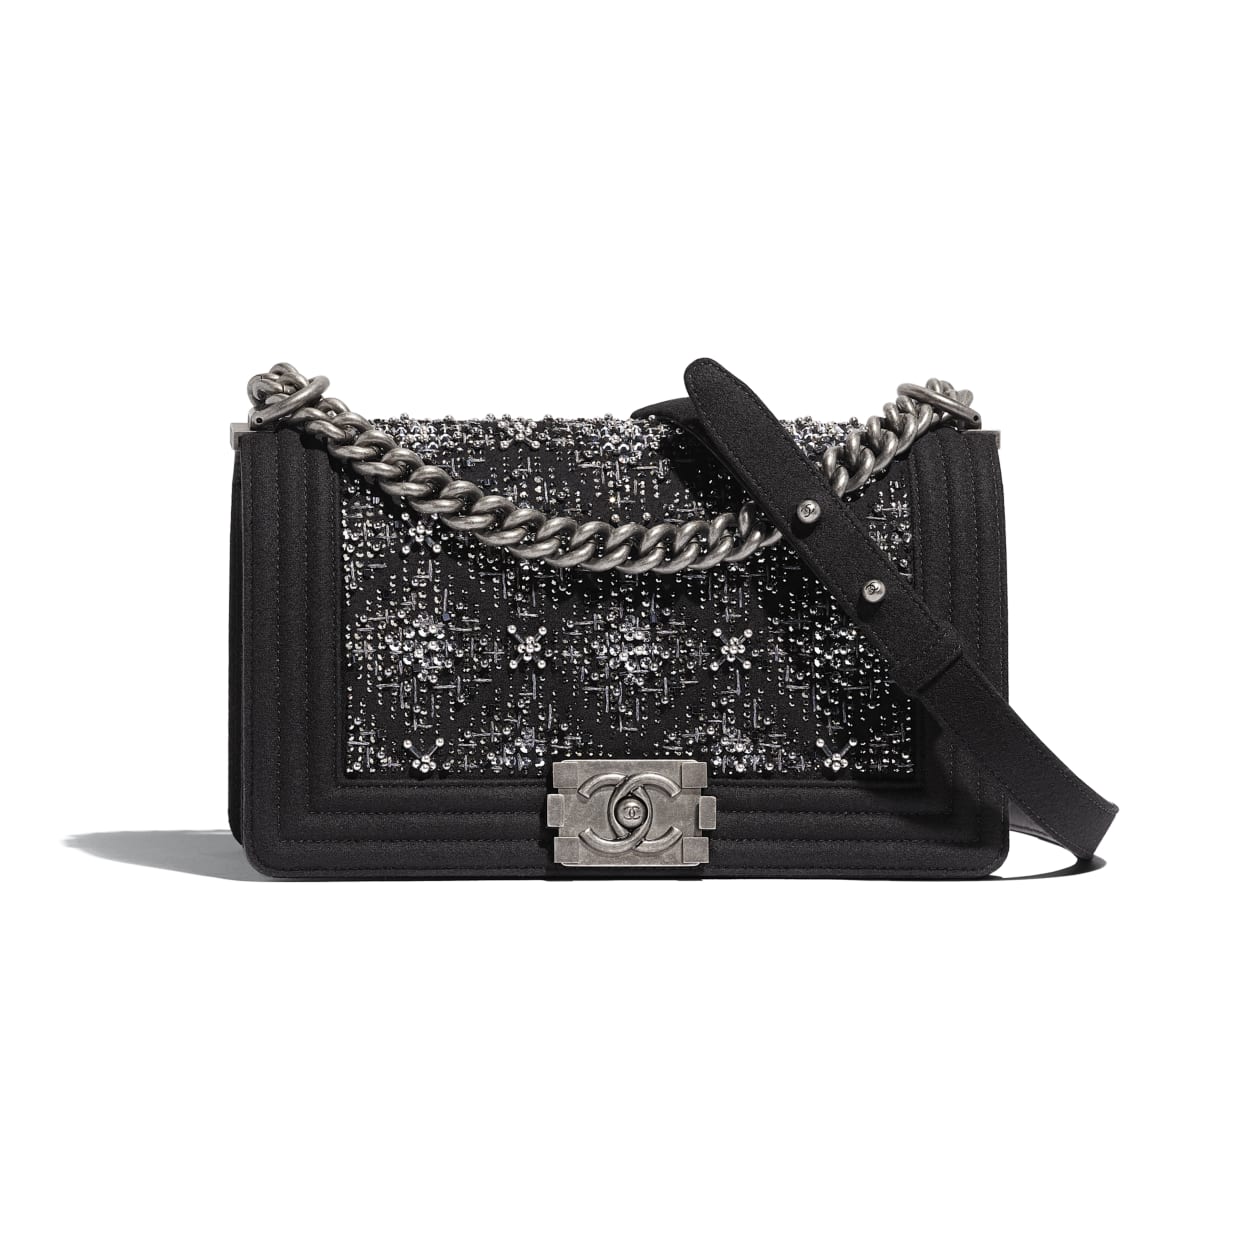 Chanel Fall/Winter 2018 Act 1 Bag Collection - Spotted Fashion